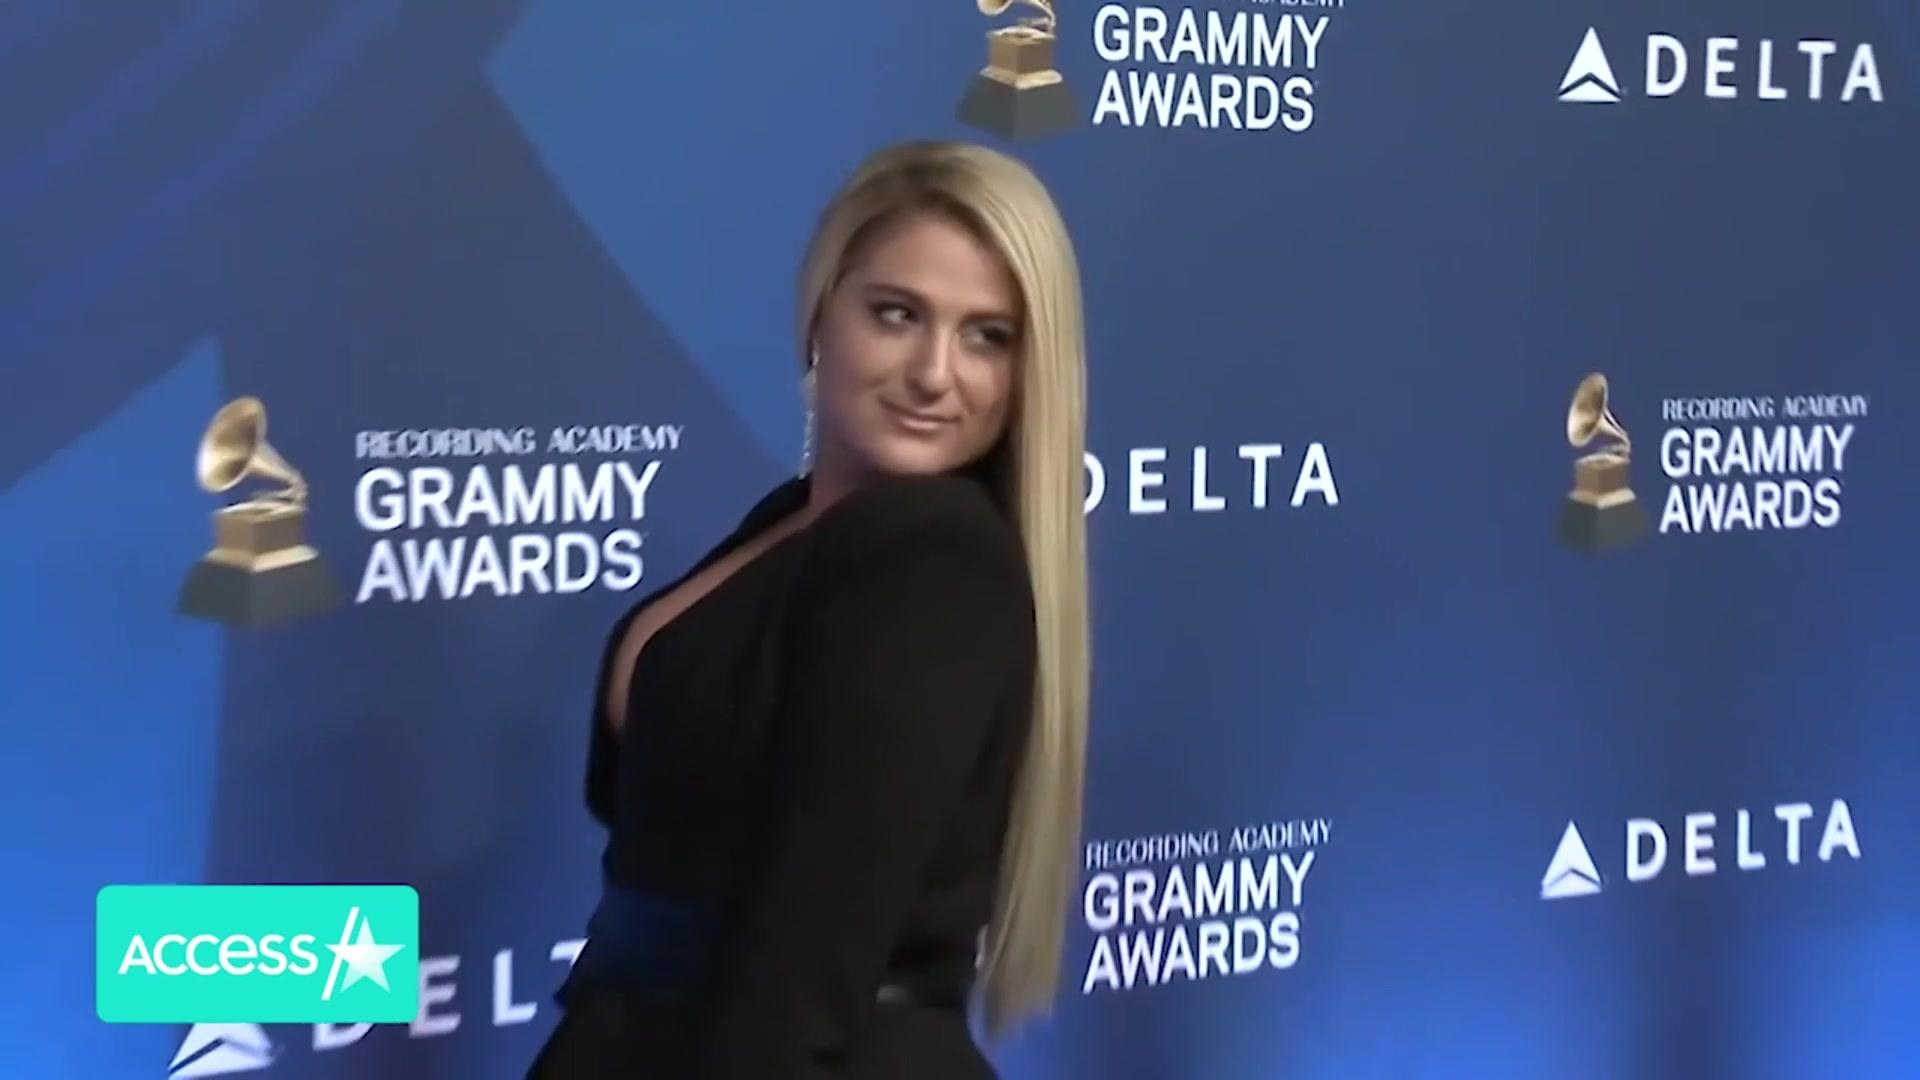 Meghan Trainor Made You Look Official Lyrics & Meaning, Verified, Meghan  Trainor, lyrics, song, Meghan, Duchess of Sussex